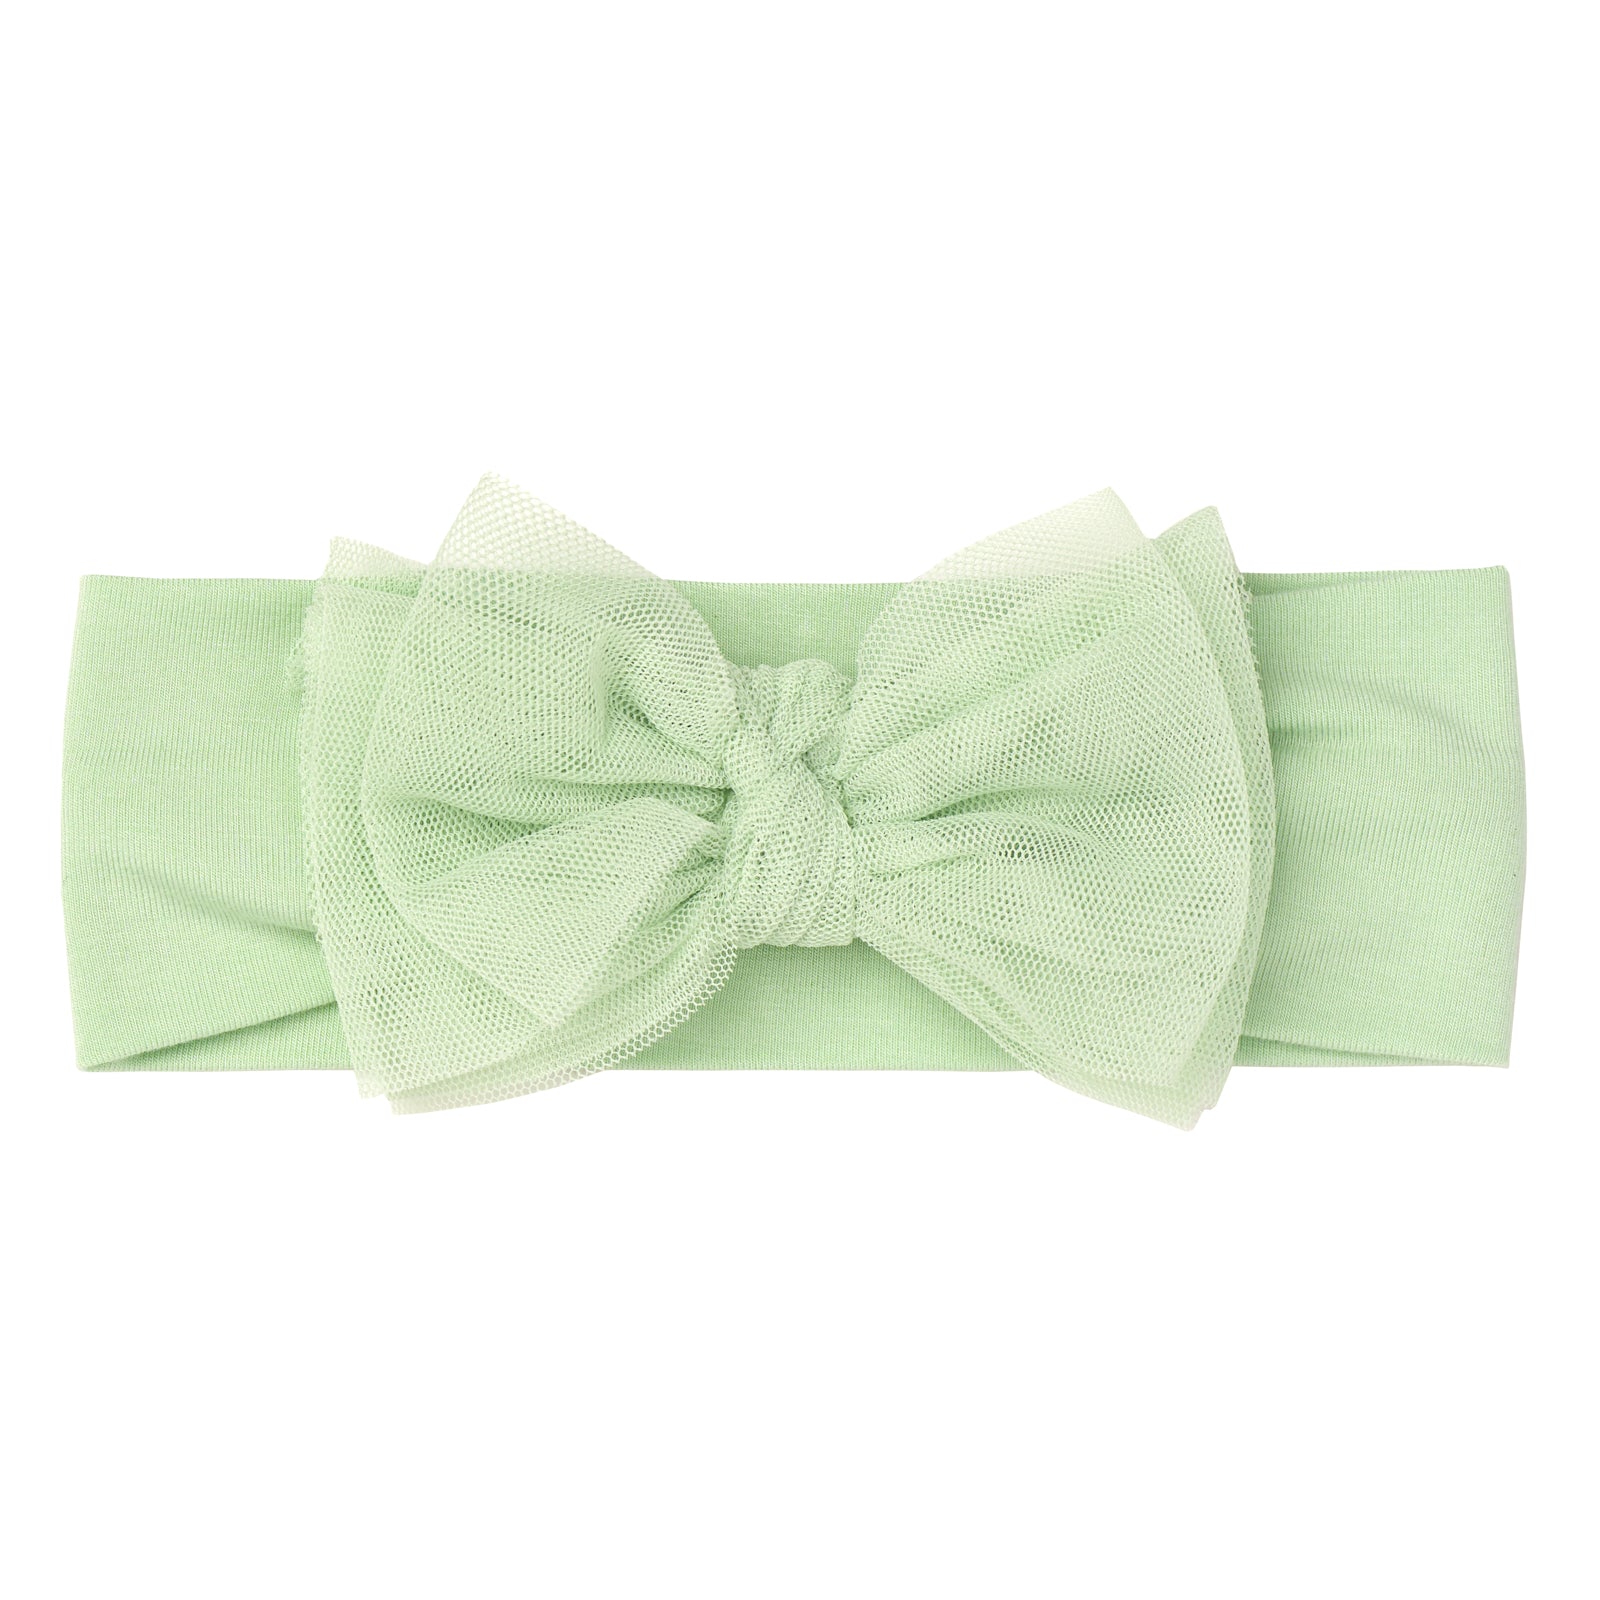 Flat lay image of a Green tulle luxe bow headband